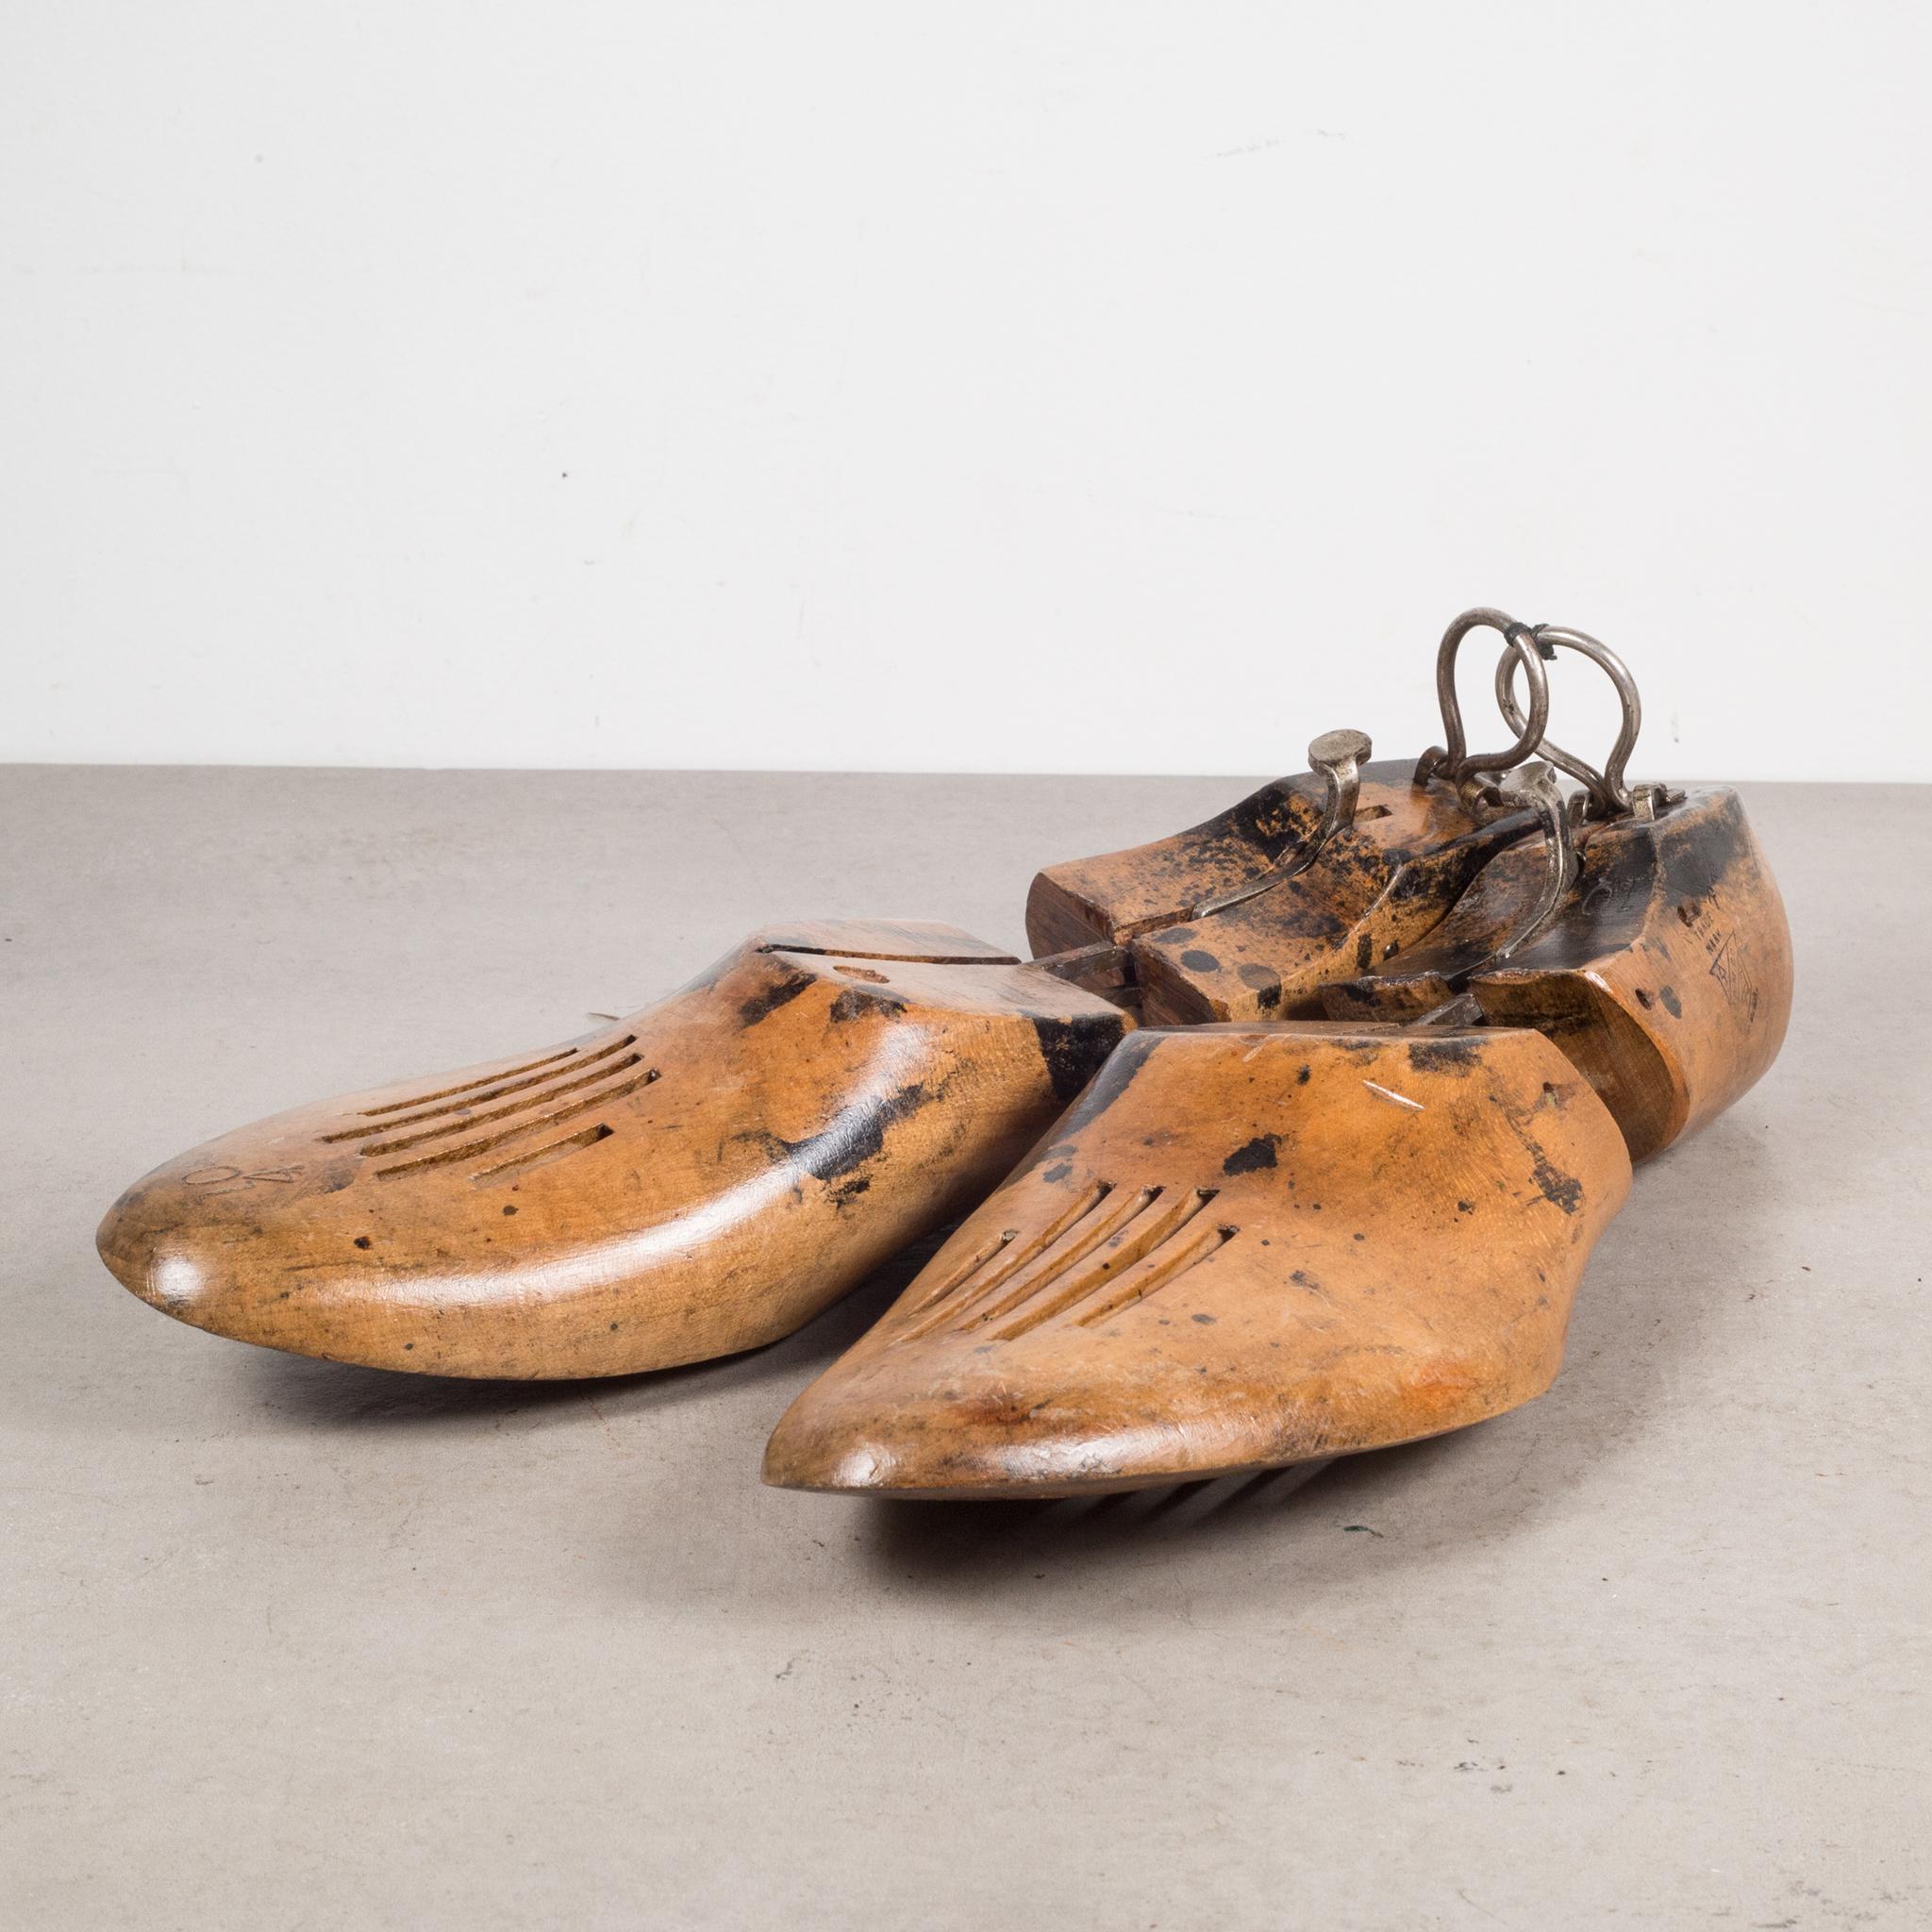 Original pairs of cobbler's wooden shoe forms. They have retained their original finish and have the appropriate wear.

Creator unknown.
Date of manufacture c.1920
Materials and techniques maple or beech.
Condition good. Wear consistent with